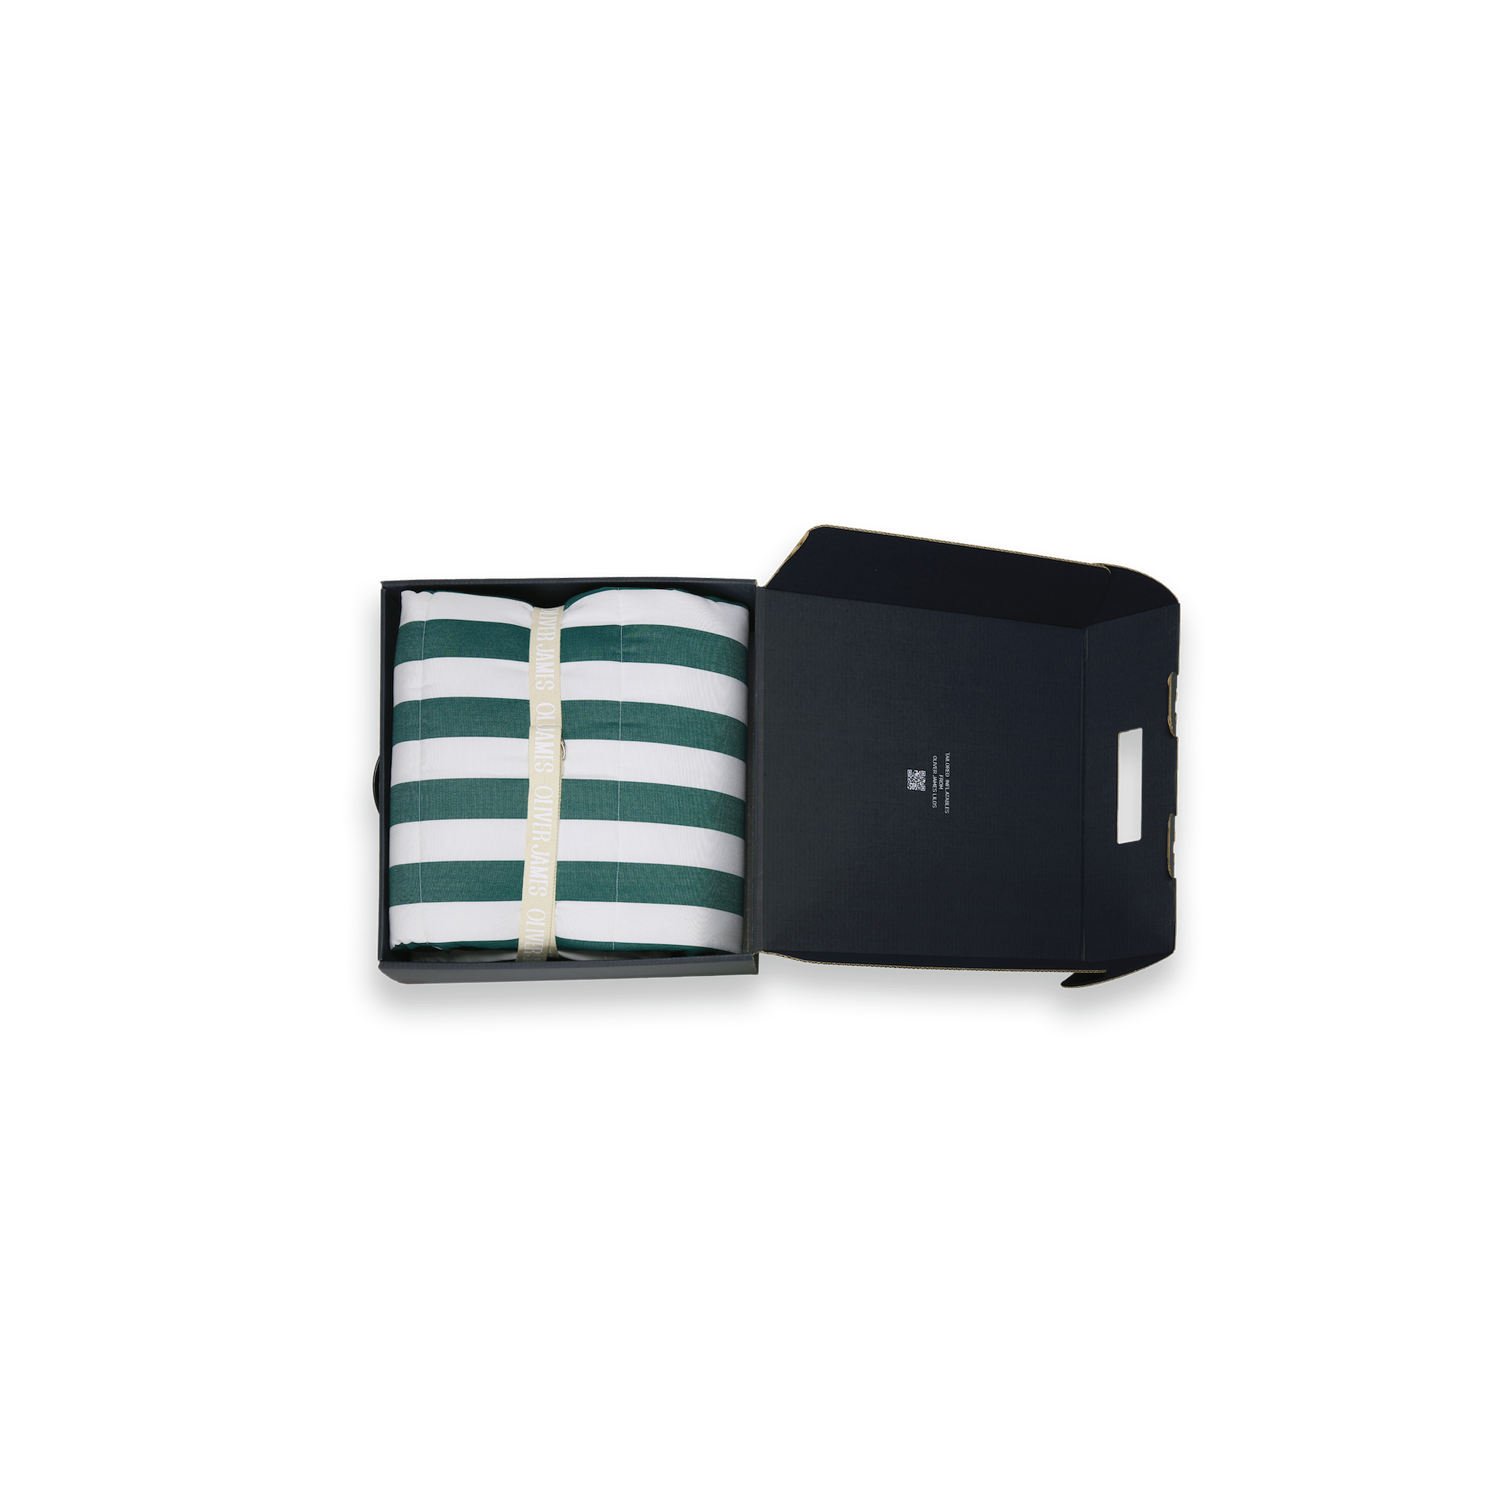 A double white and green stripe inflatable luxury pool float lounger cover folded in black box box with a belt, card and pump.